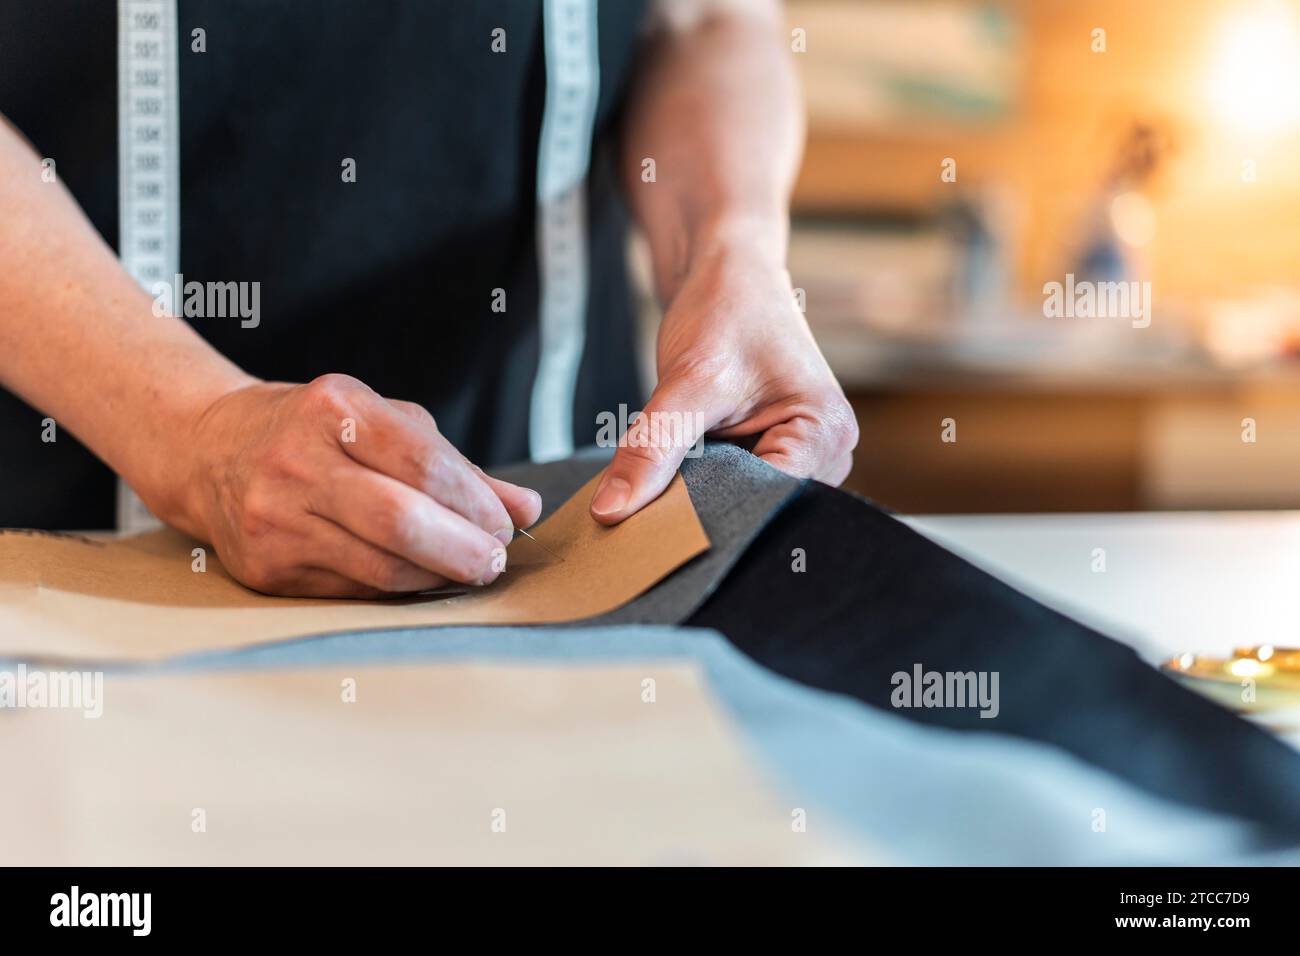 Fashion designer putting pins into pattern and fabric Stock Photo